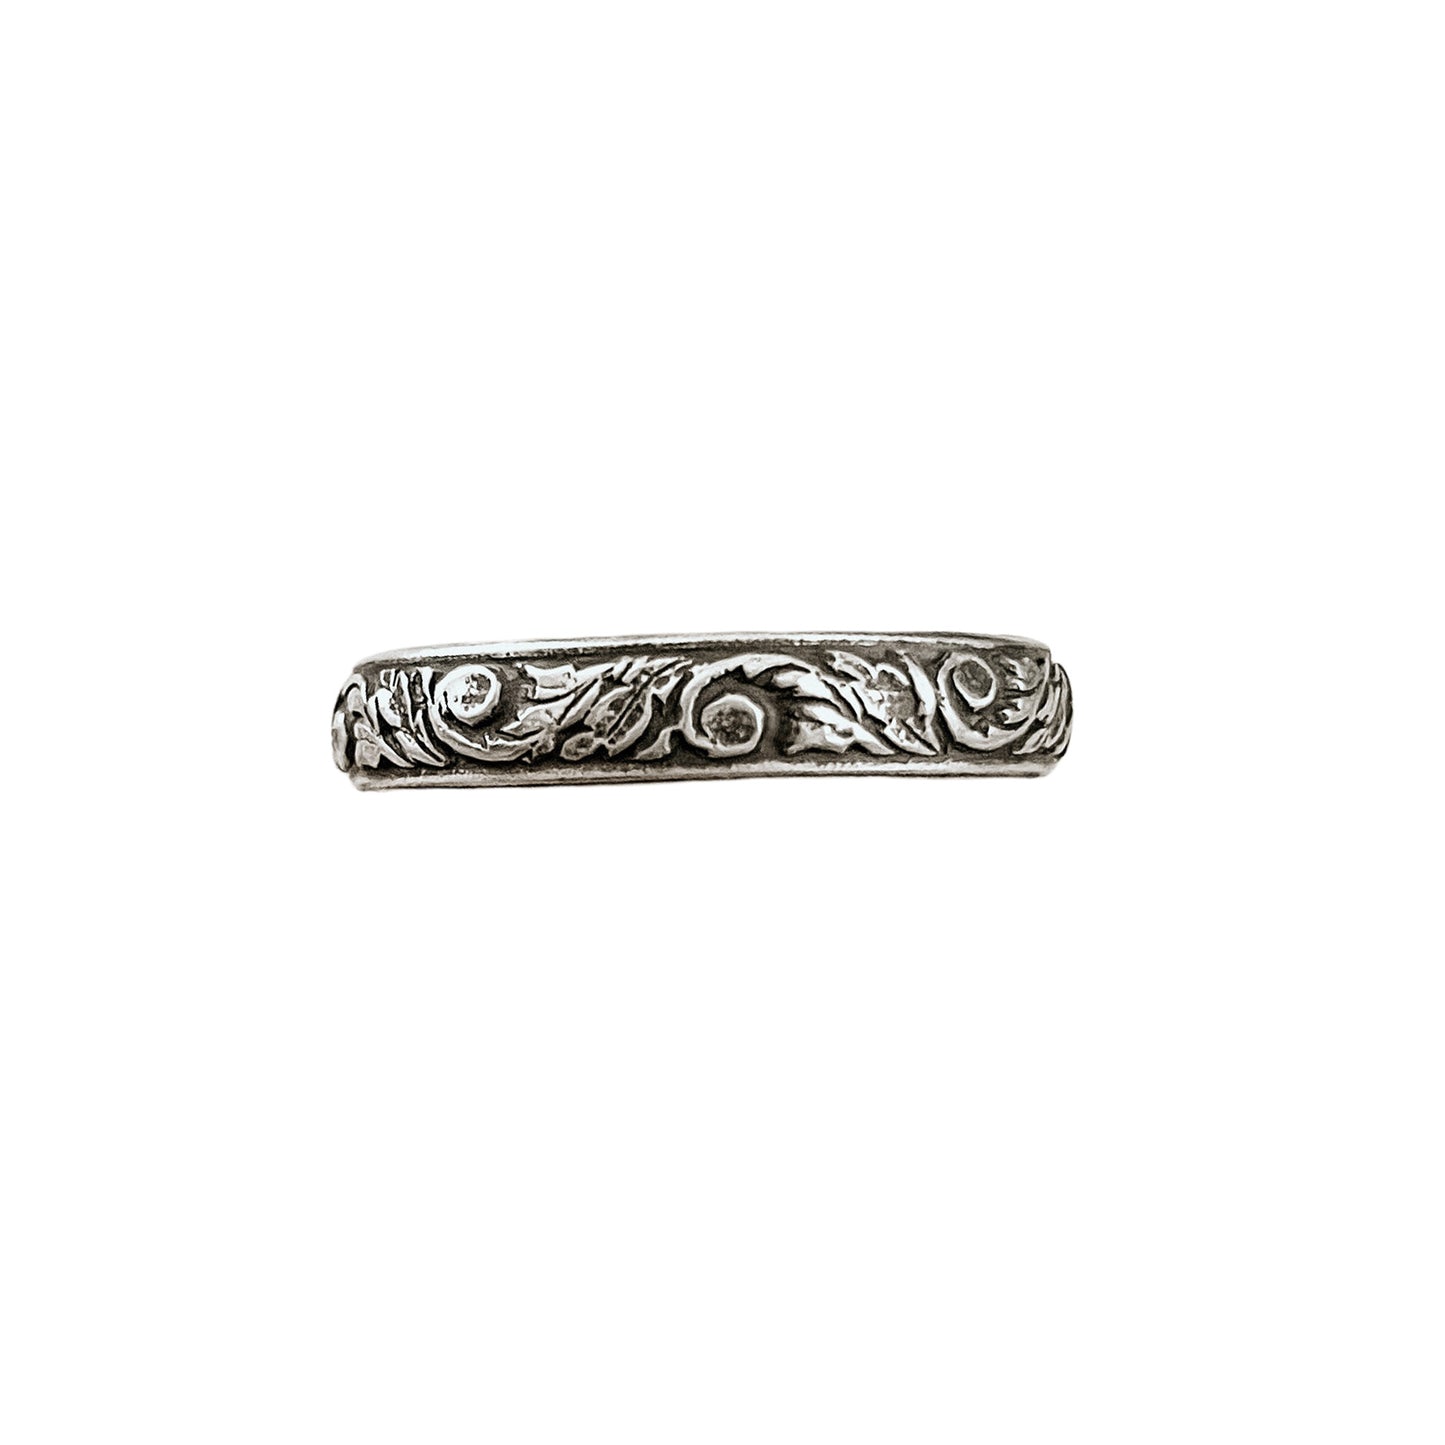 Western Floral Sterling Silver Stacking Ring in antiqued finish.